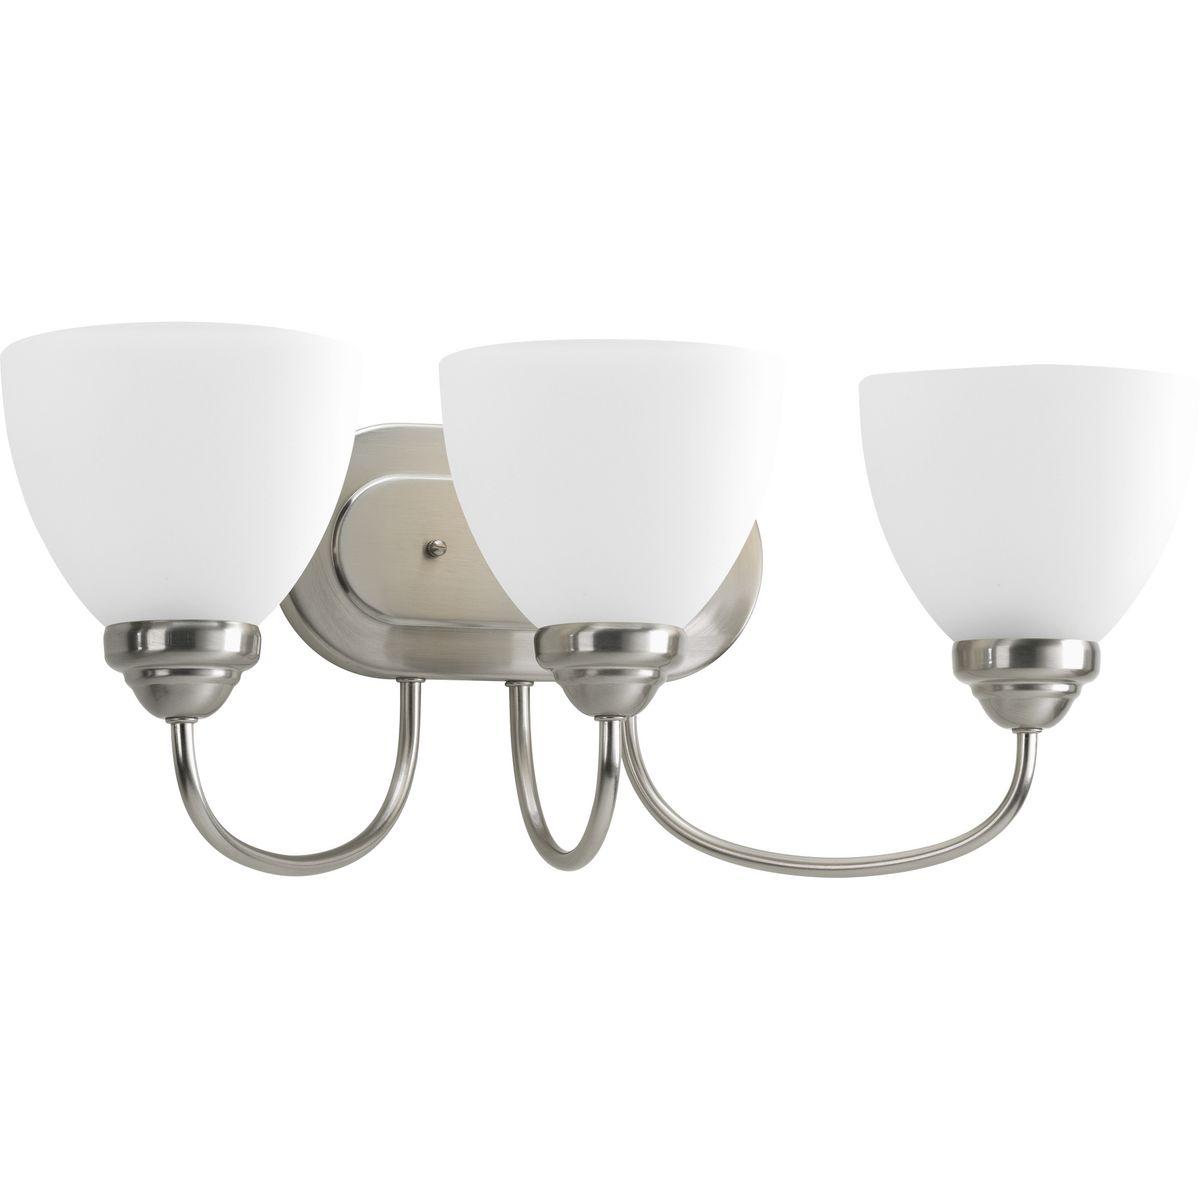 Hubbell P2919-09 The Heart Collection possesses a smart simplicity to complement today's home. This three-light bath bracket includes etched glass shades to add distinction and provide pleasing illumination to any room. Versatile design permits installation of fixture fac